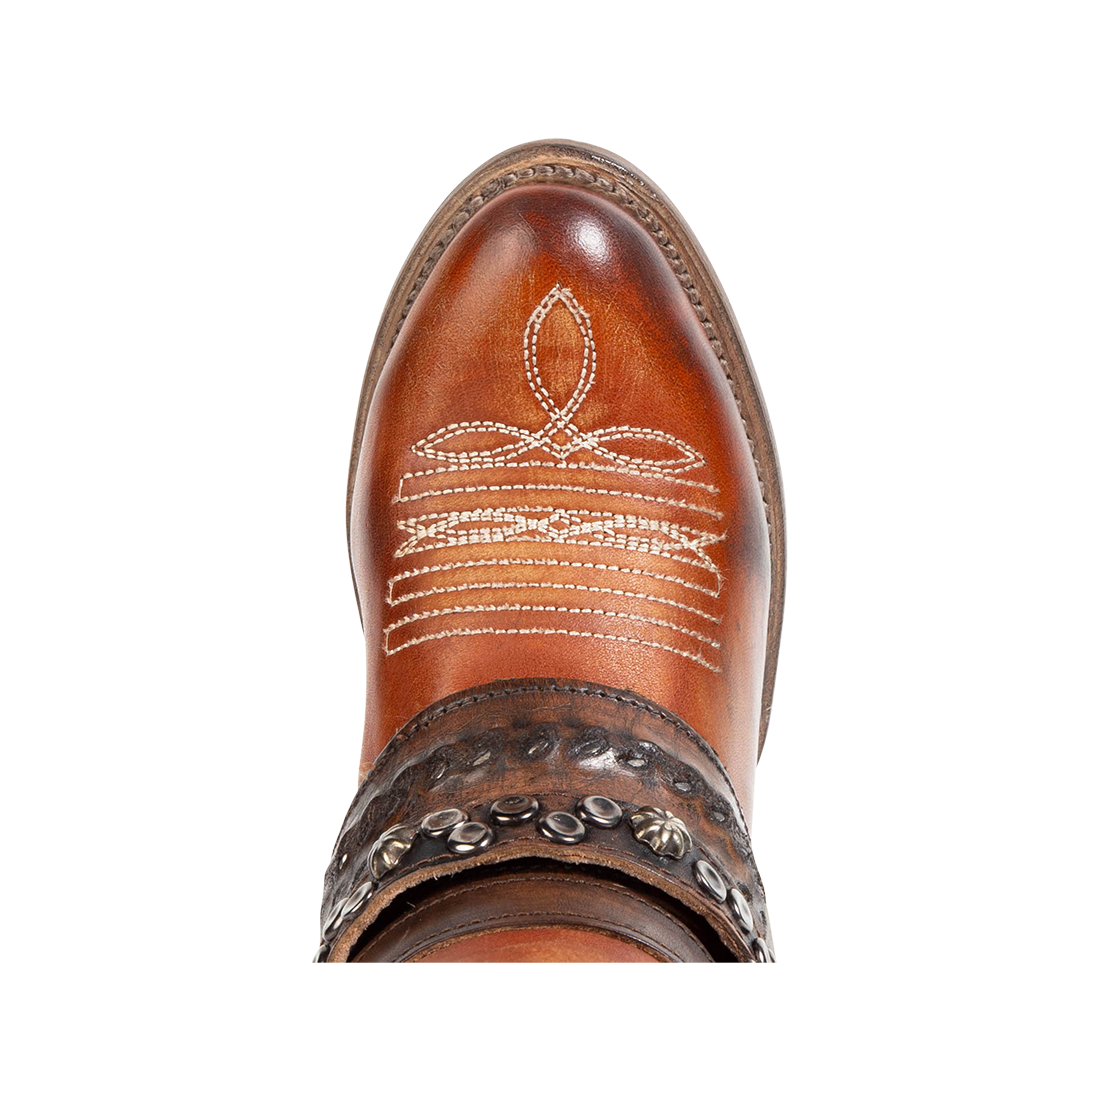 Top view showing round toe and stitch detailing on FREEBIRD women's Rodondo whiskey boot